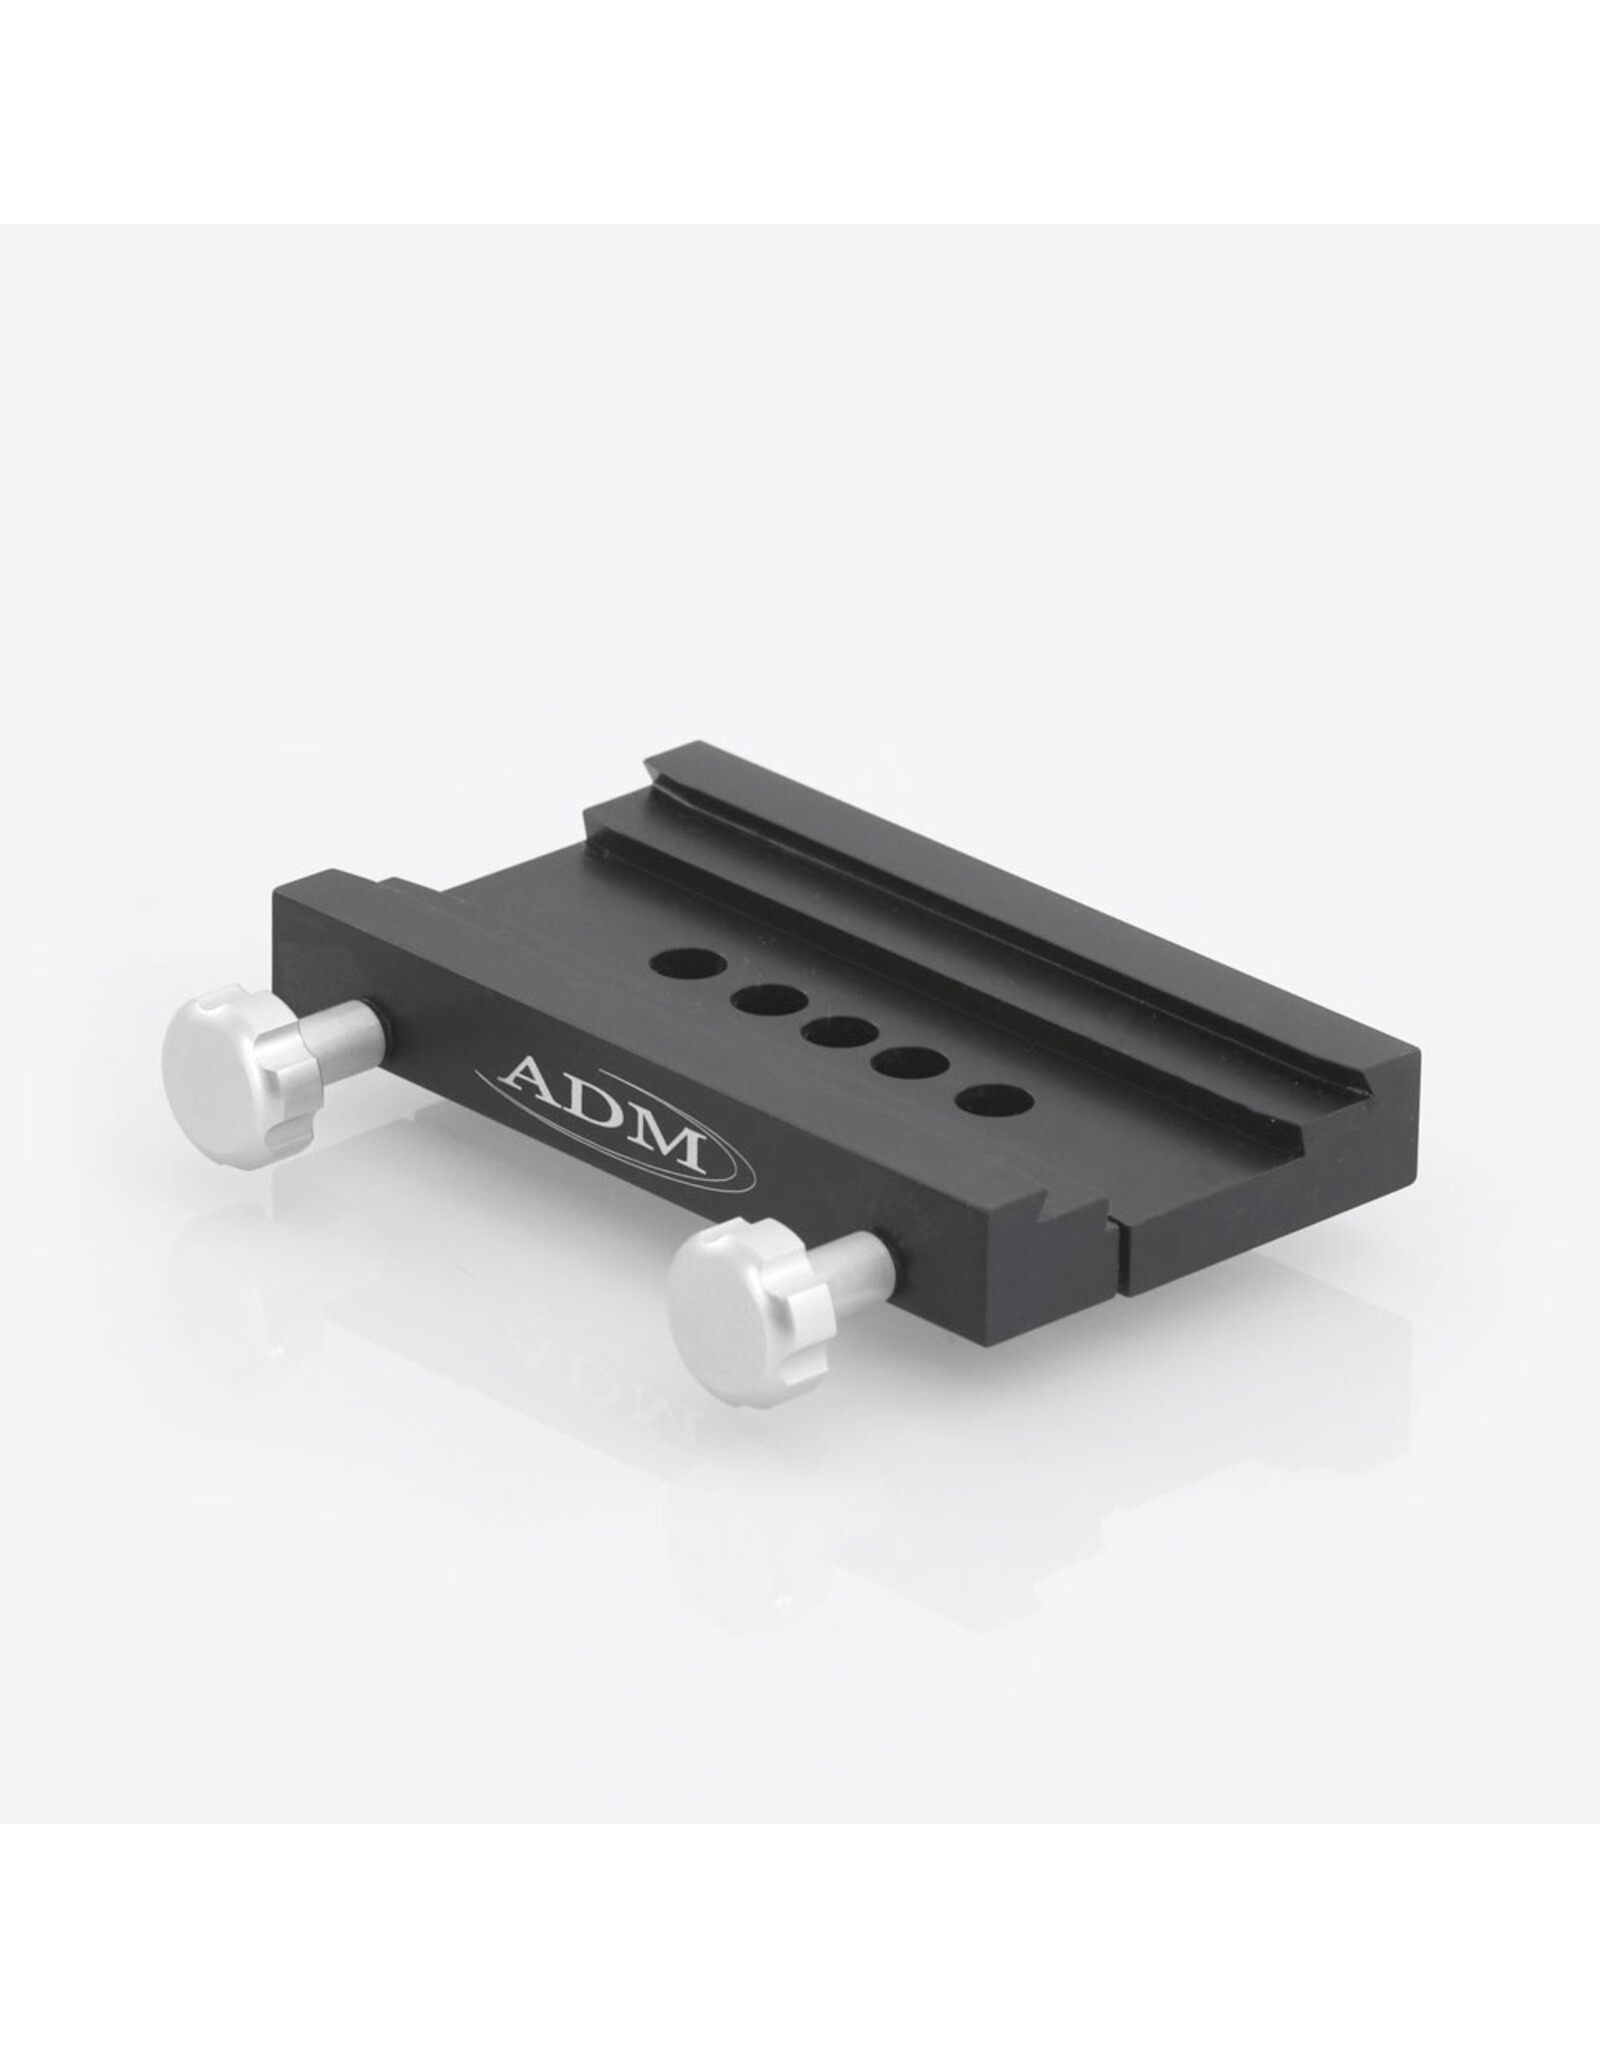 ADM DUAL-ZEISS- DUAL Series Saddle for Zeiss dovetail. 8mm Counterbored Version.